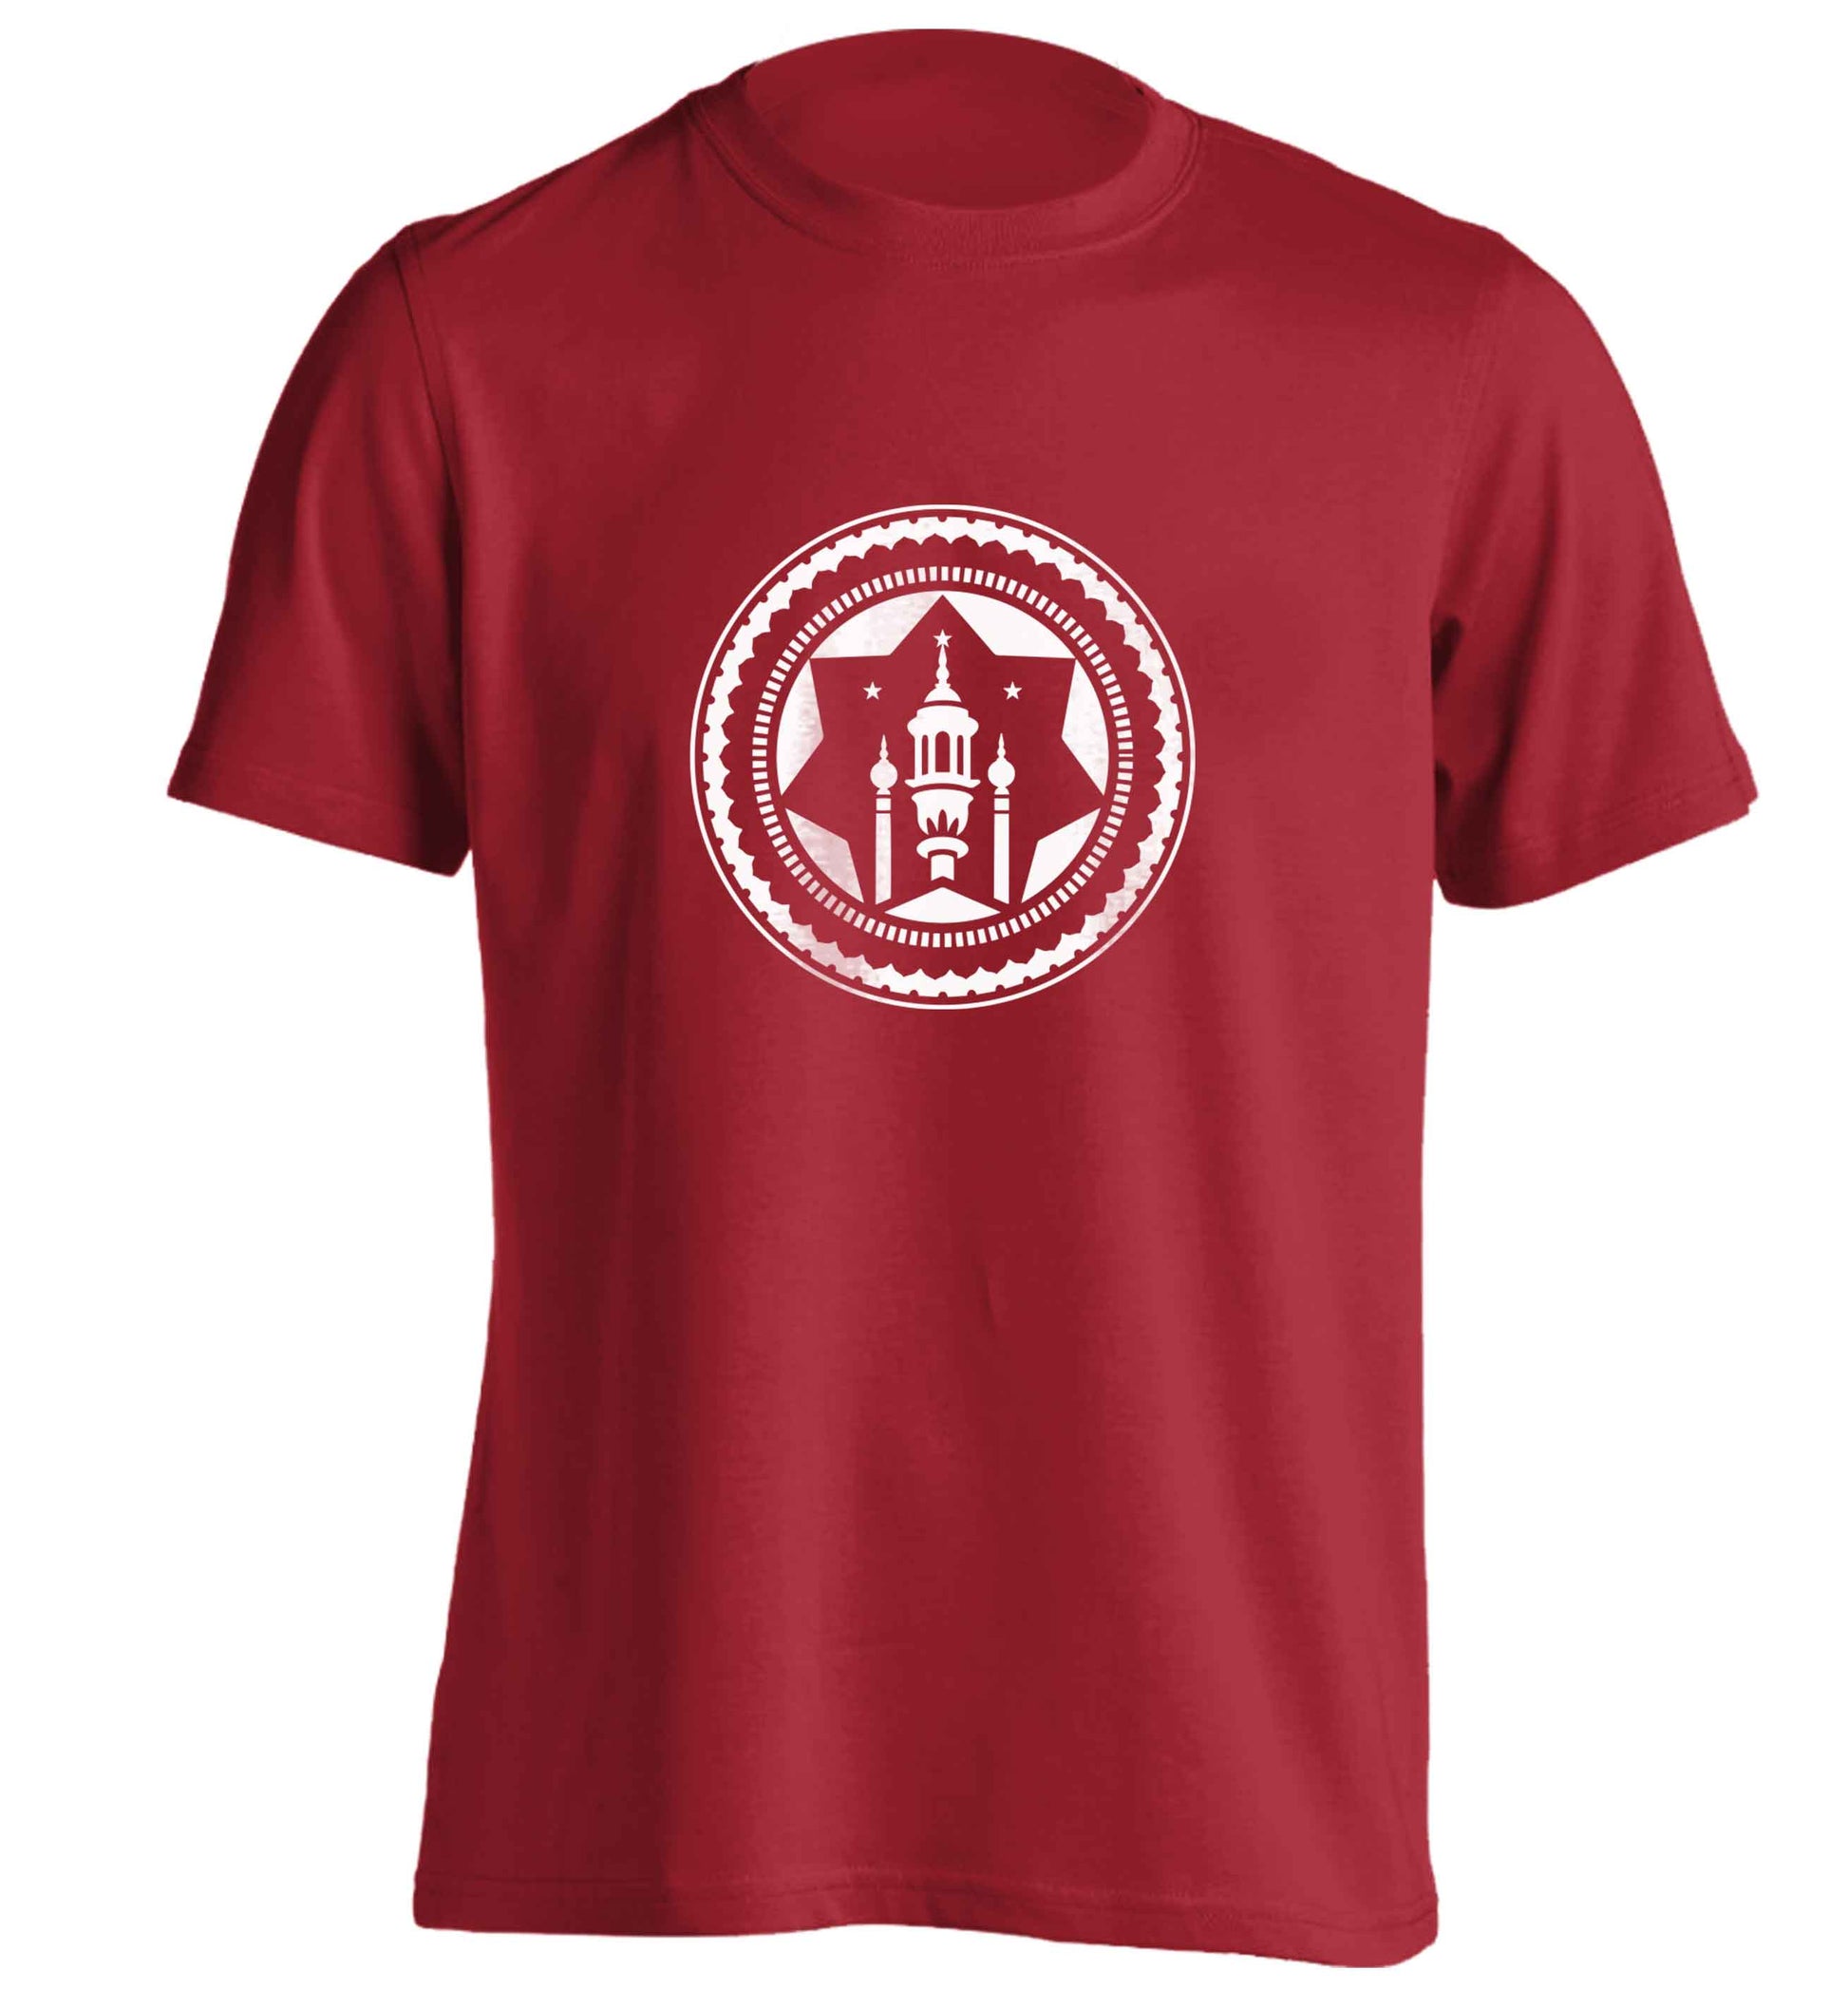 mosque adults unisex red Tshirt 2XL